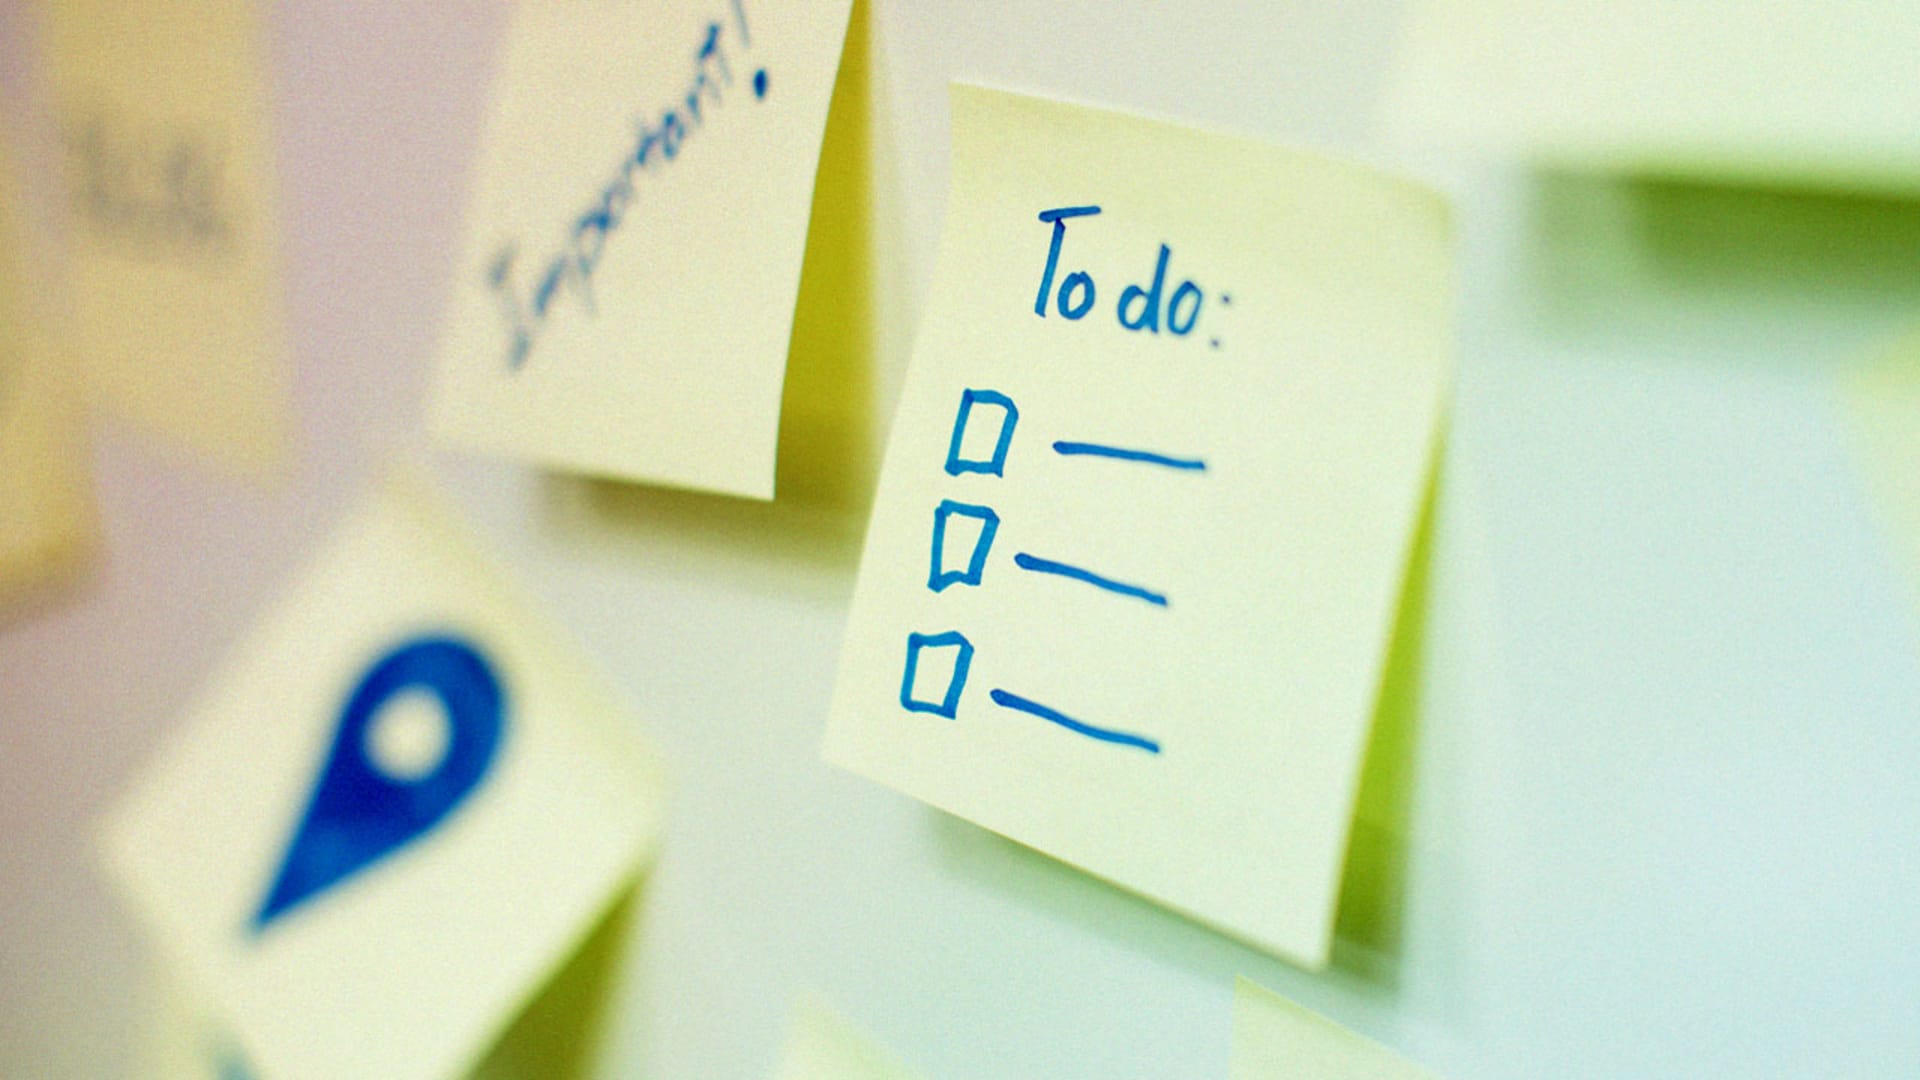 These Five Tricks Will Help You Finally Complete Your To-Do List